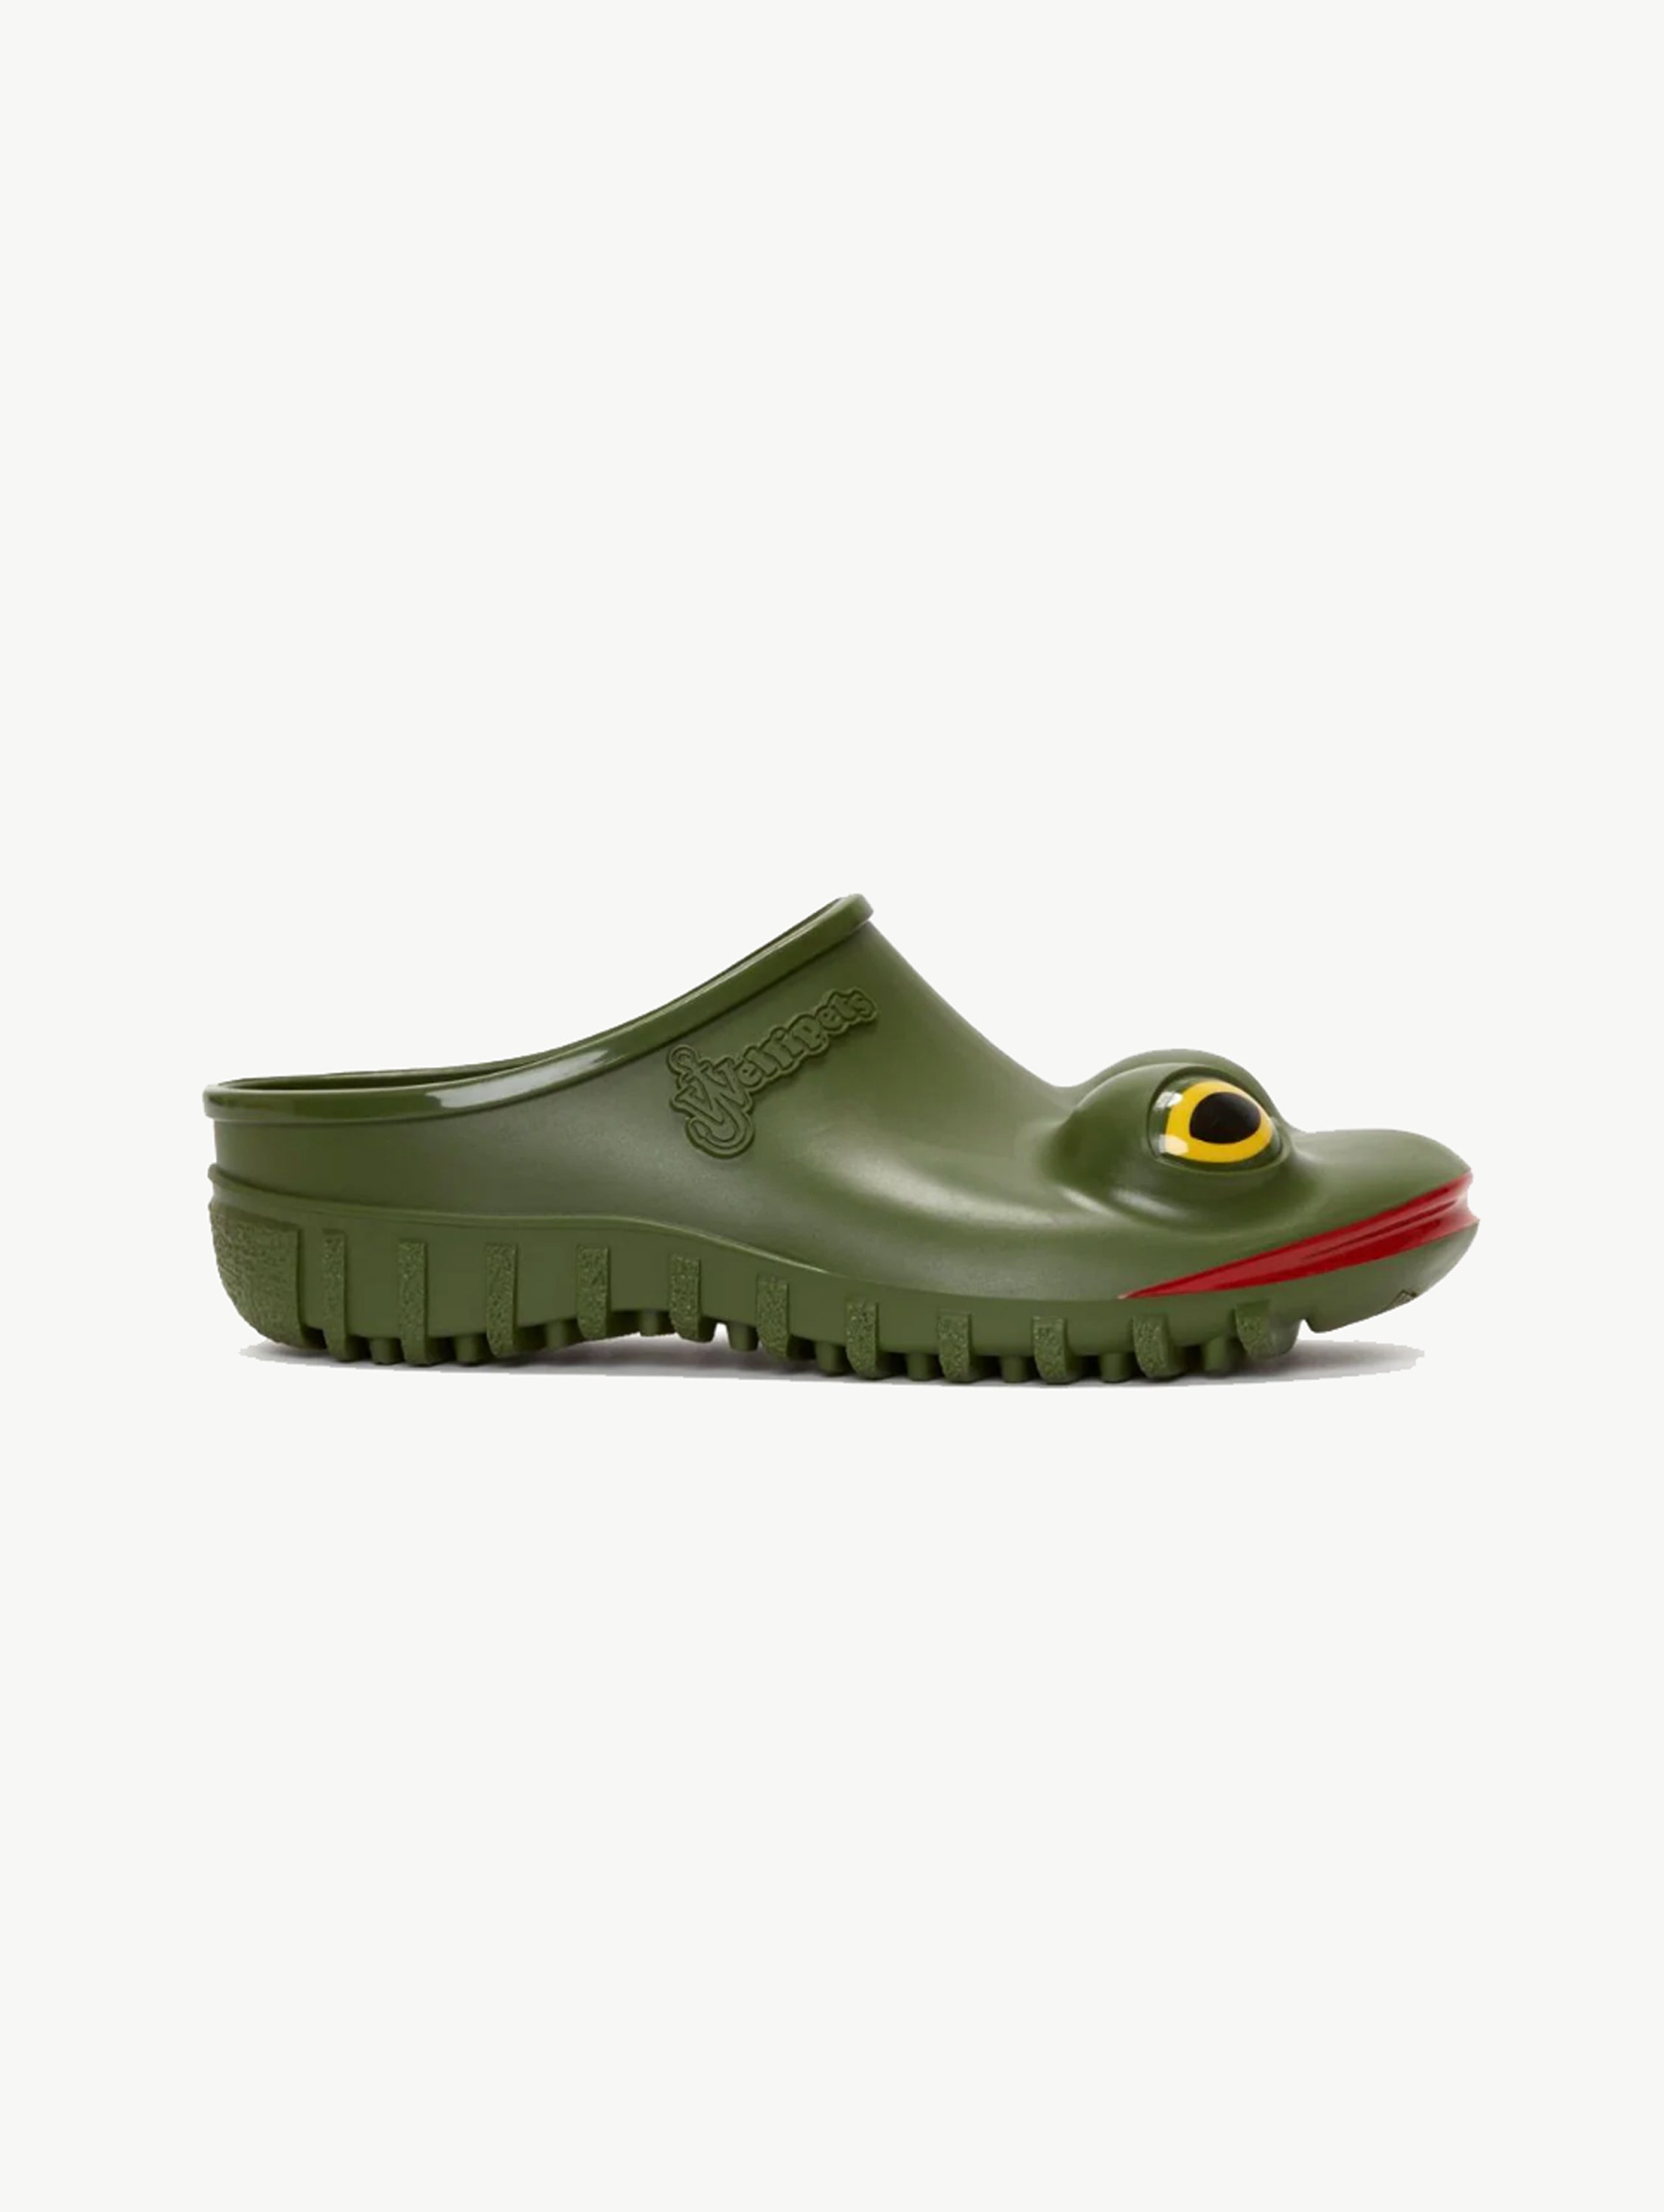 Frog clogs